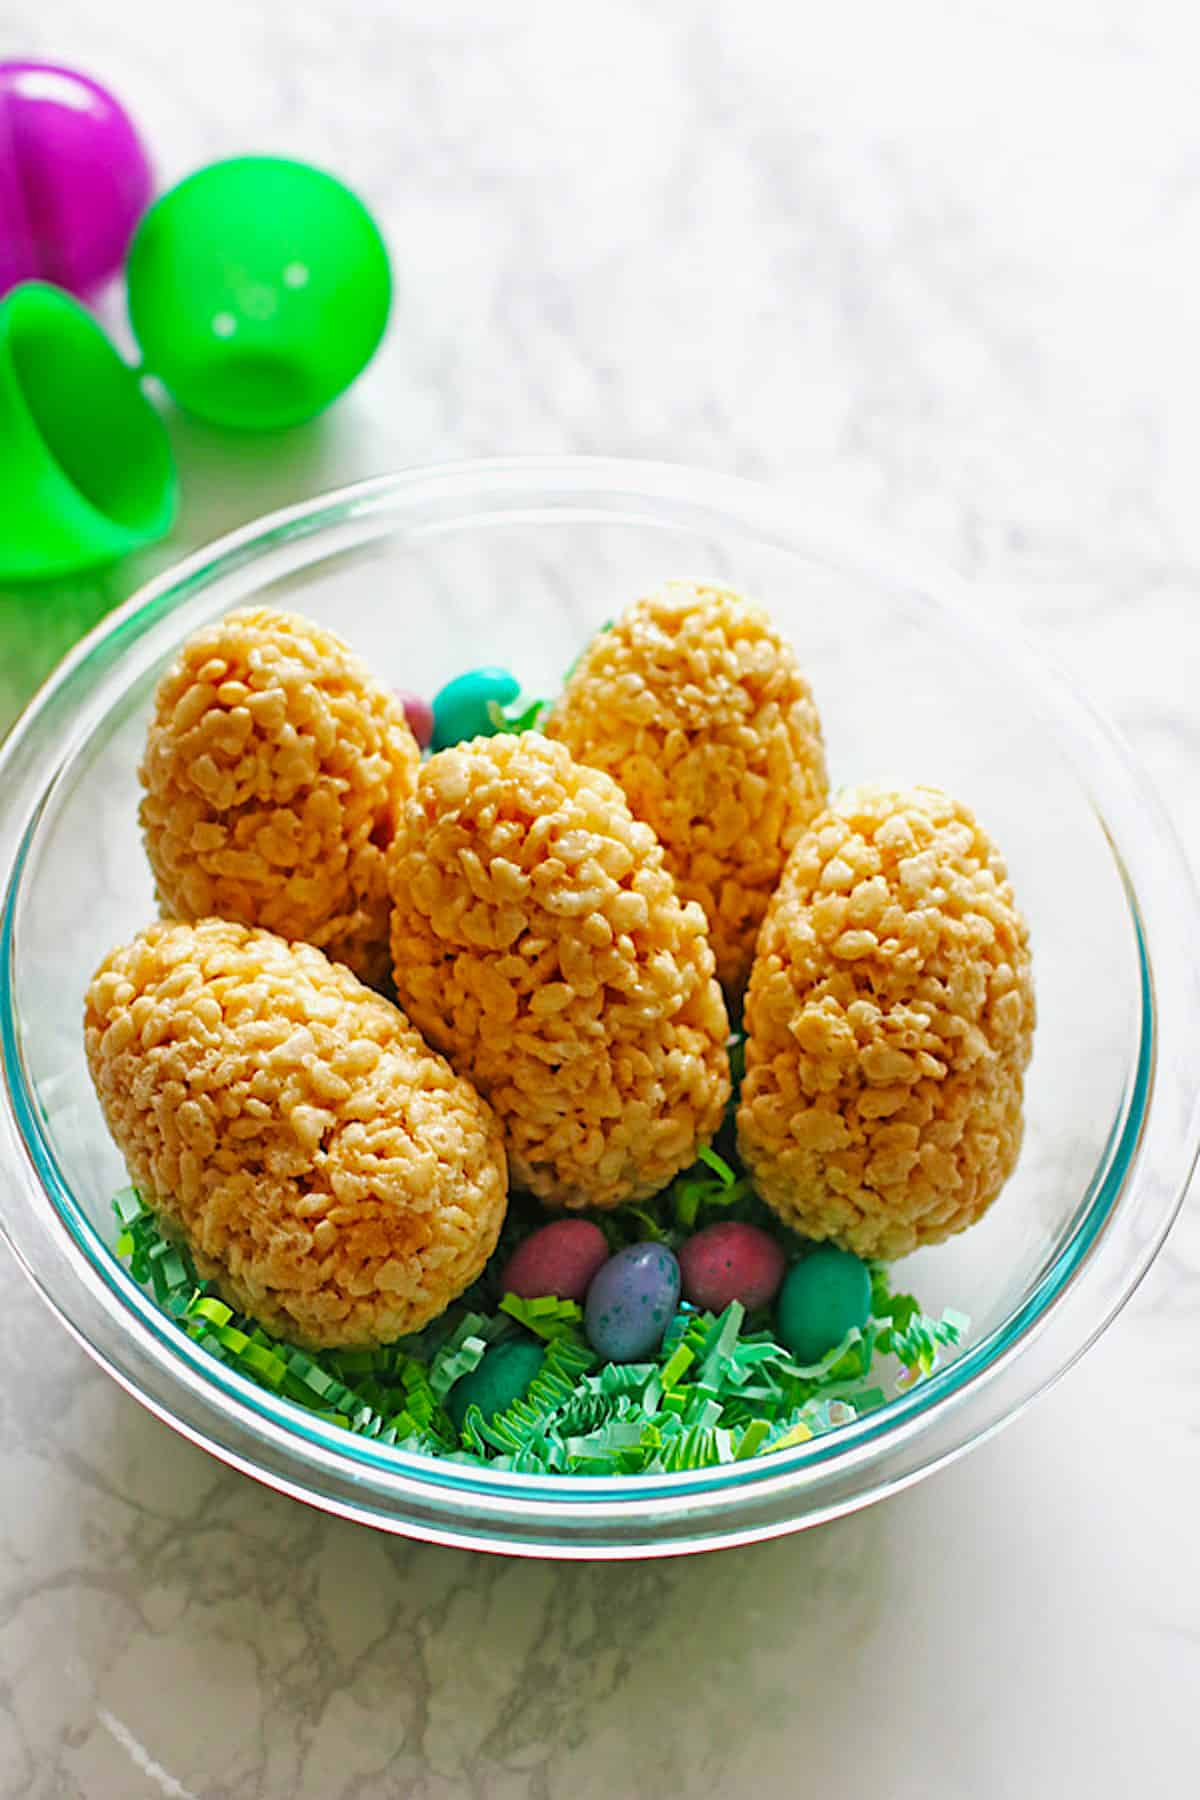 Easter eggs made out of rice krispie treats placed in a clear bowl with green Easter grass and candy